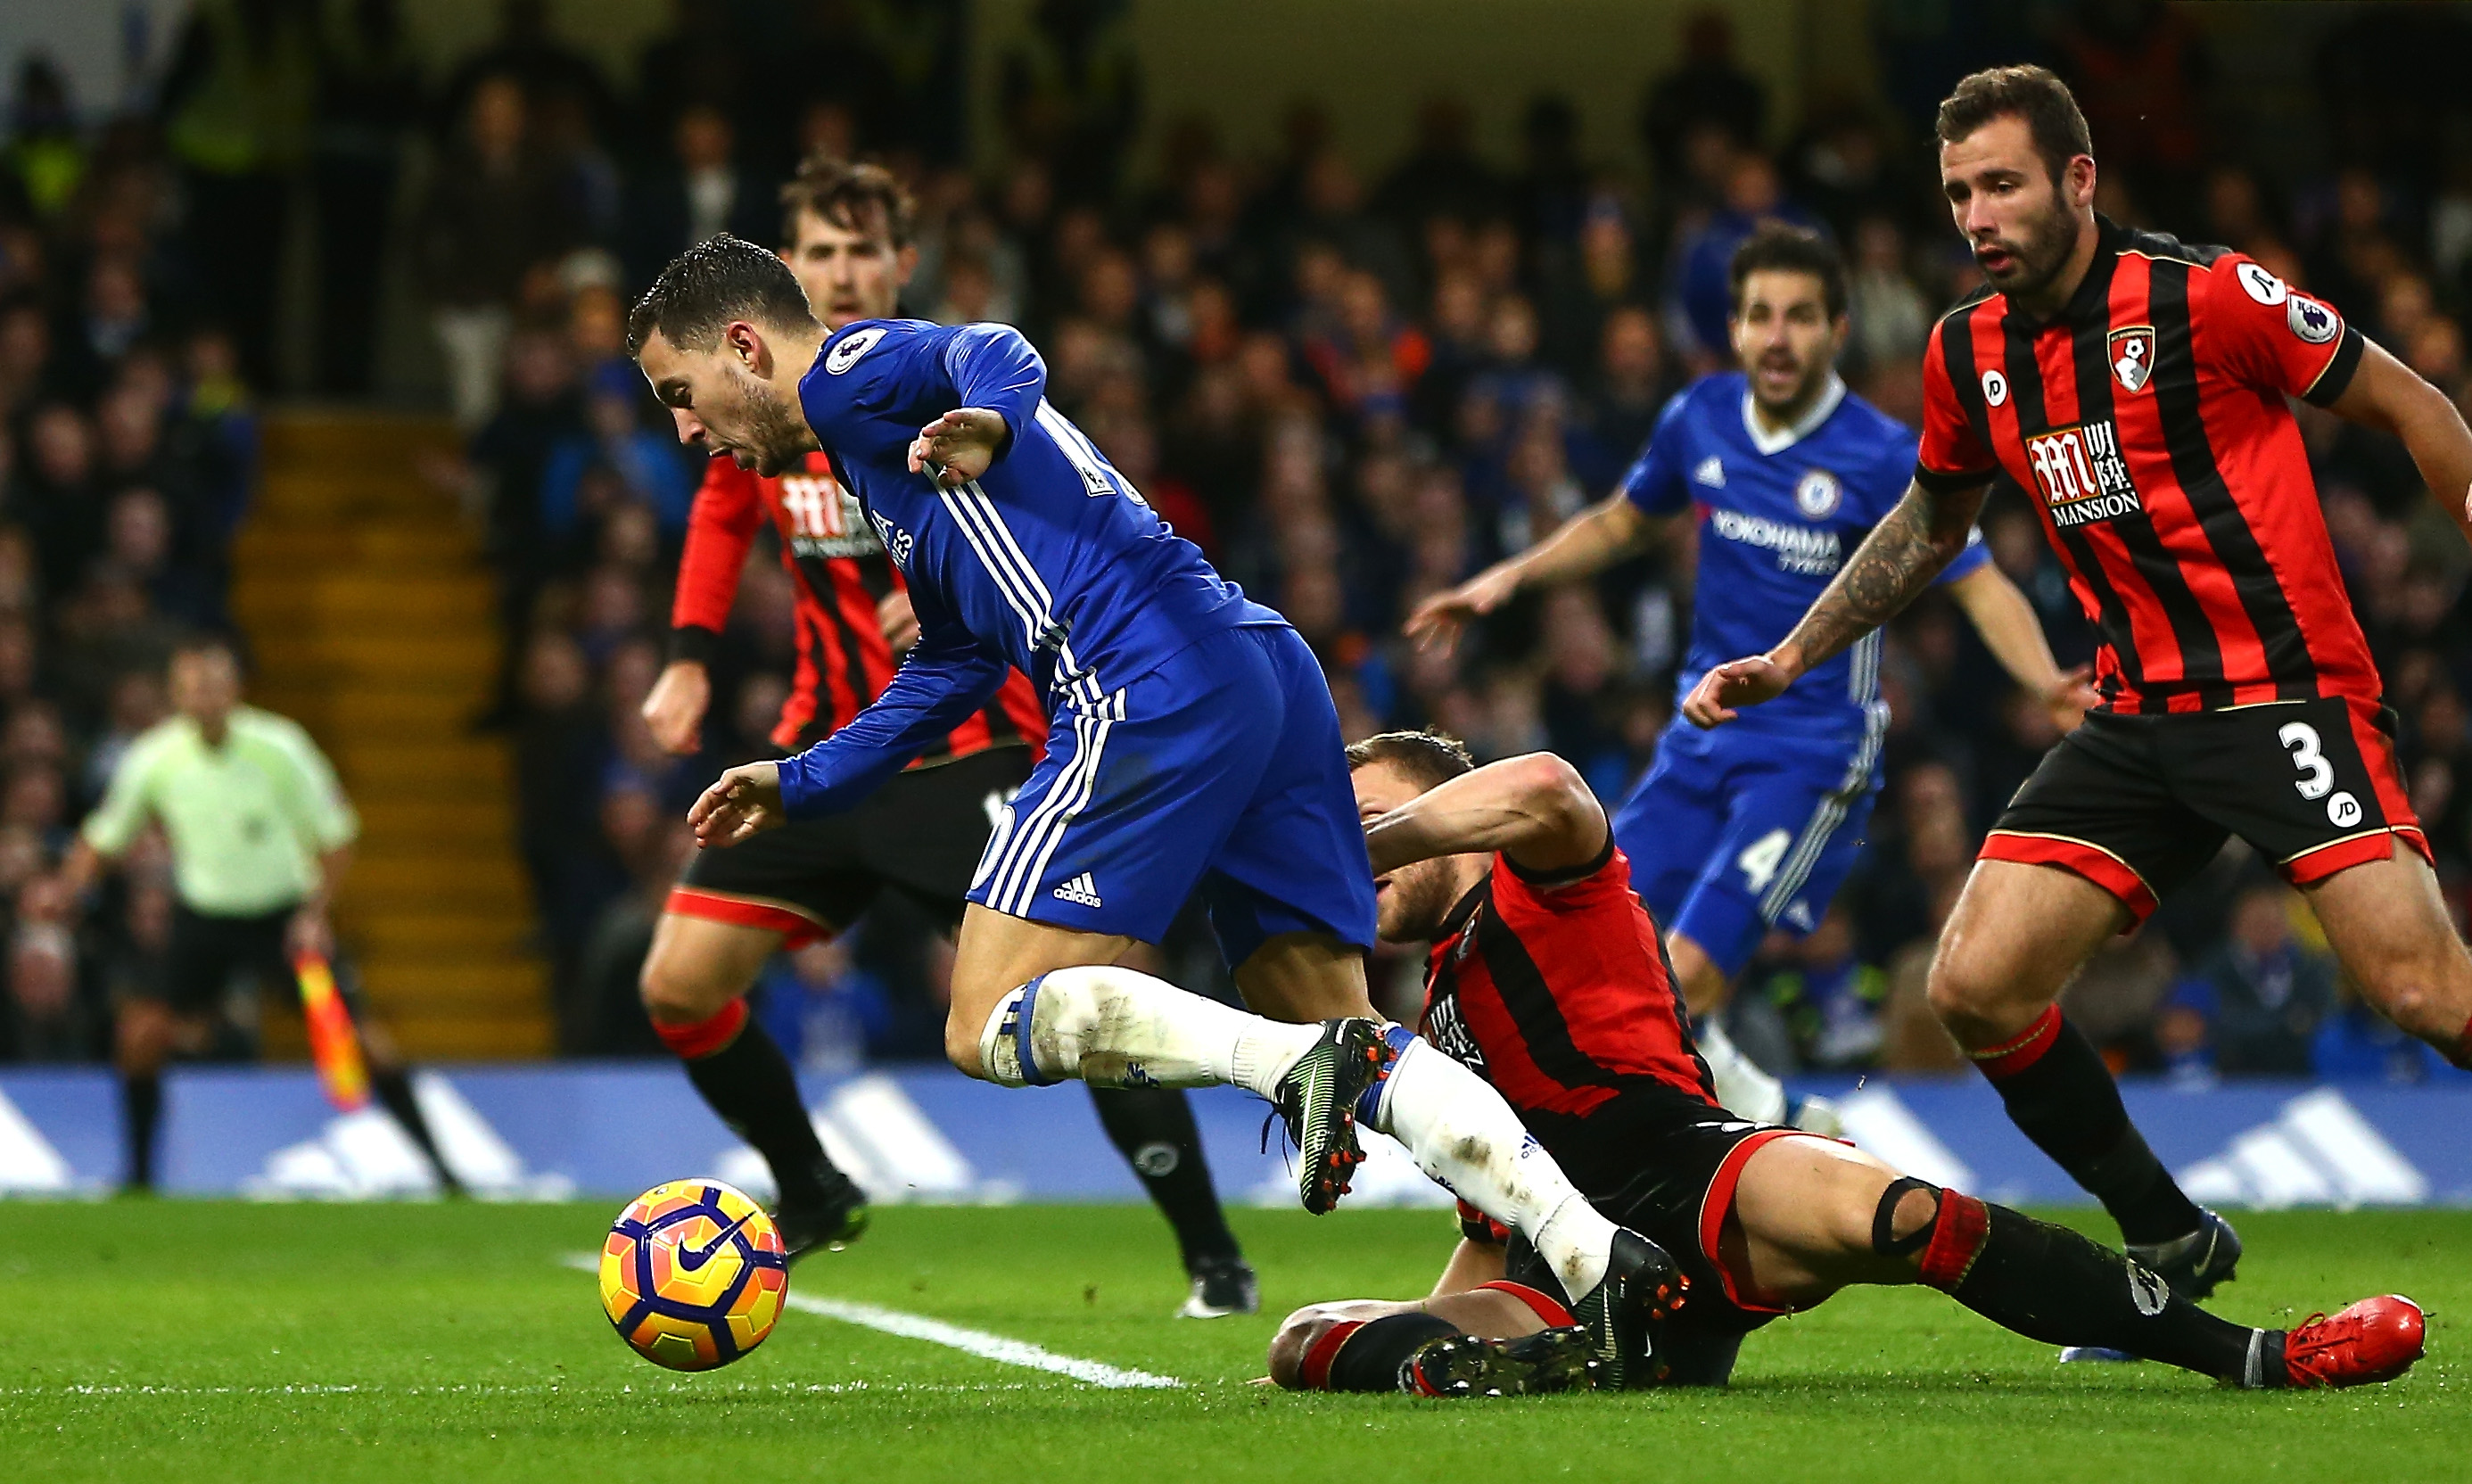 LONDON, ENGLAND - DECEMBER 26:  Eden Hazard of Chelsea is fouled by Simon Francis of AFC Bournemouth to award a penalty to Chelsea during the Premier League match between Chelsea and AFC Bournemouth at Stamford Bridge on December 26, 2016 in London, England.  (Photo by Jordan Mansfield/Getty Images)